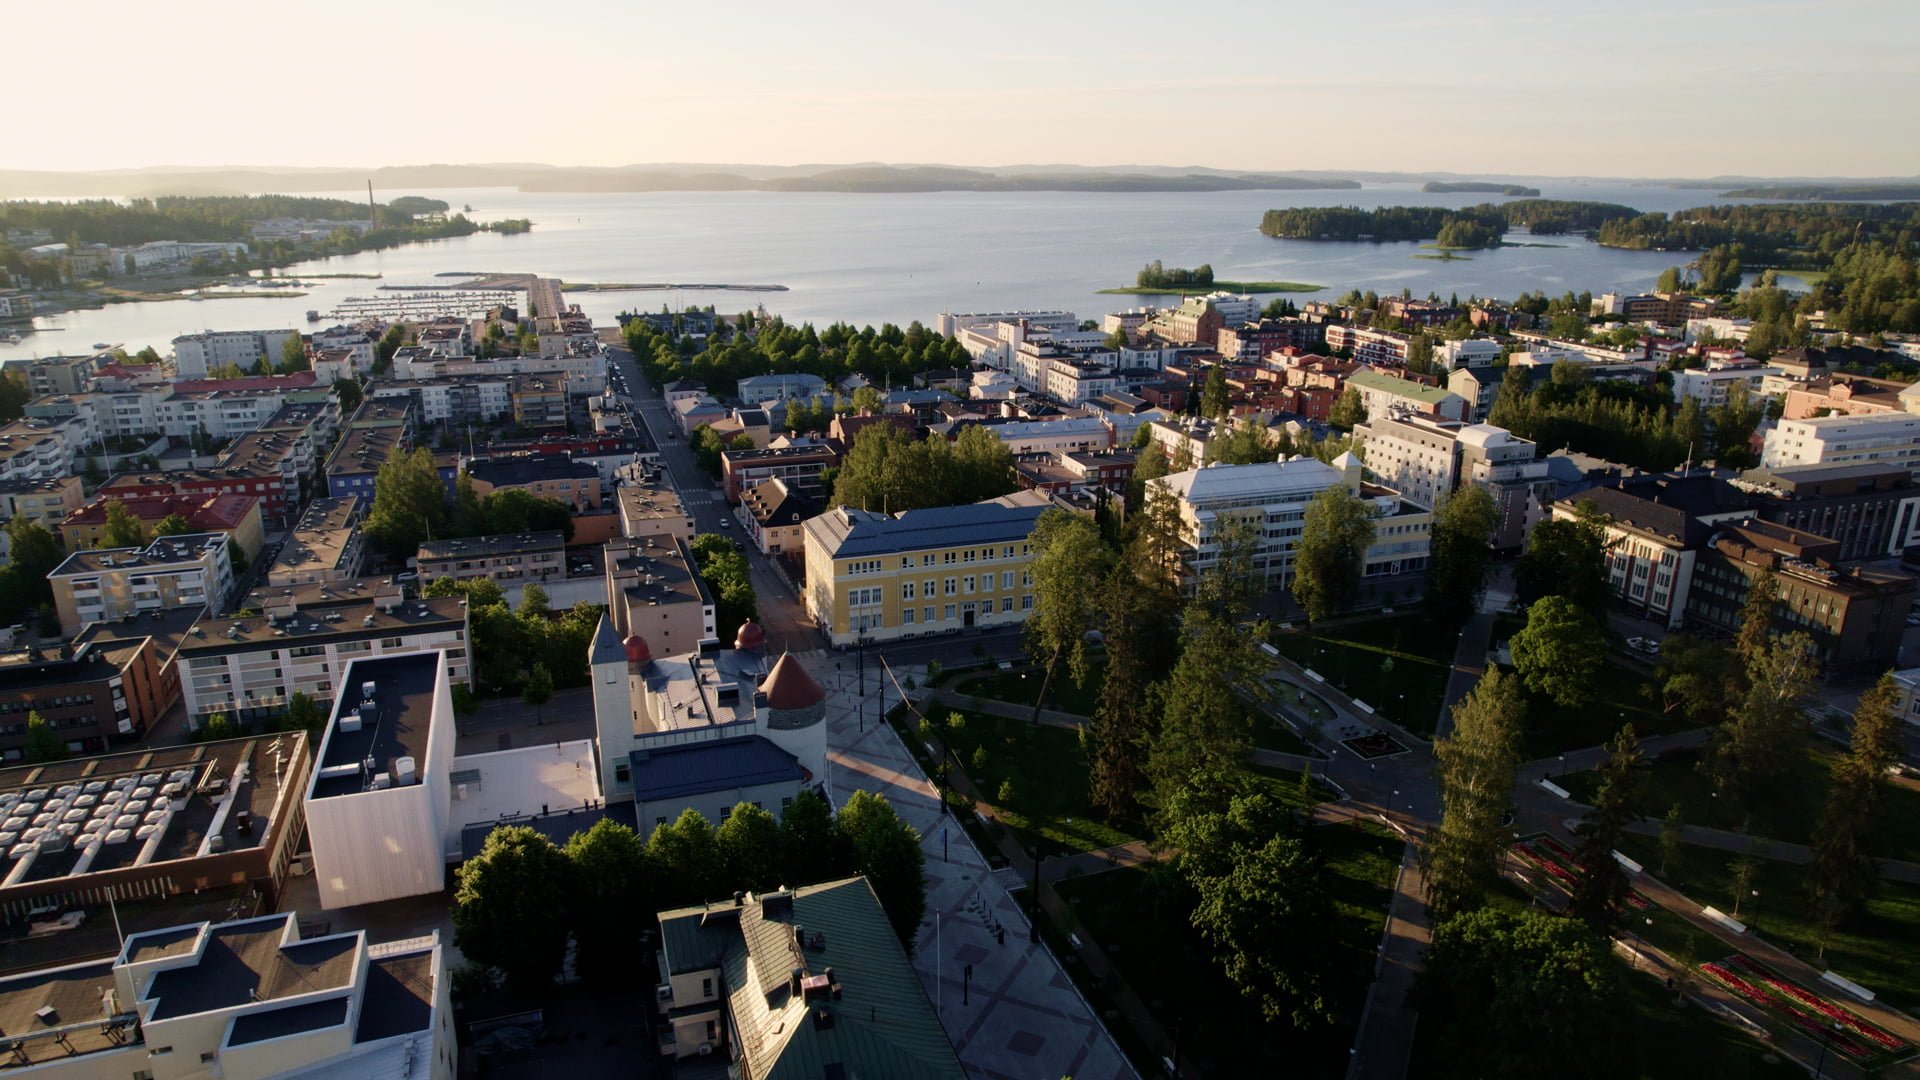 Kuopio_By_Nature_Taste, Smell and Feel the Lakejpg